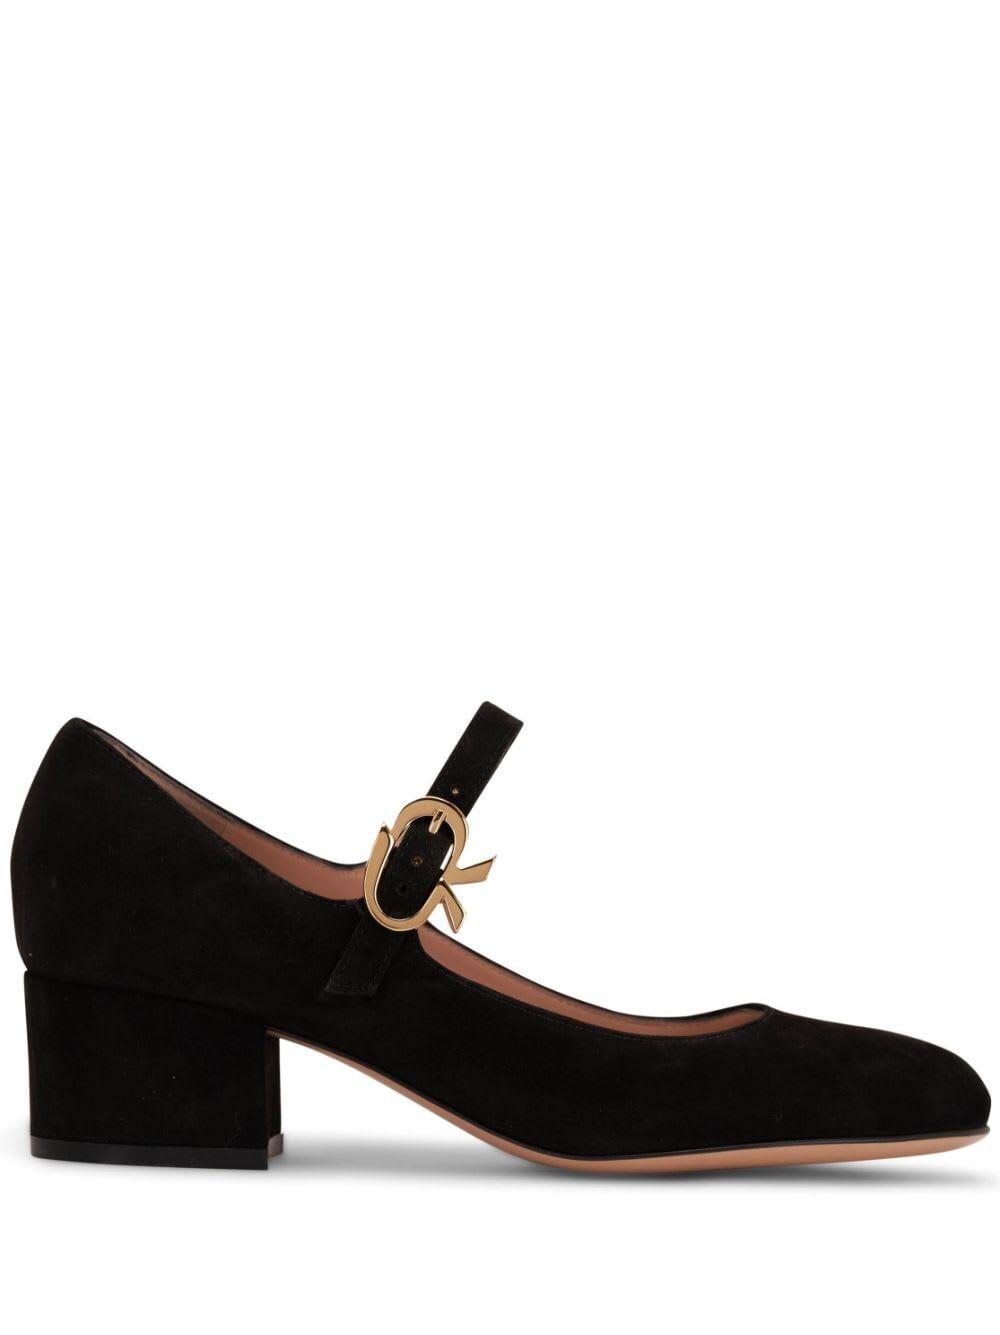 Mary Ribbon Suede Pump